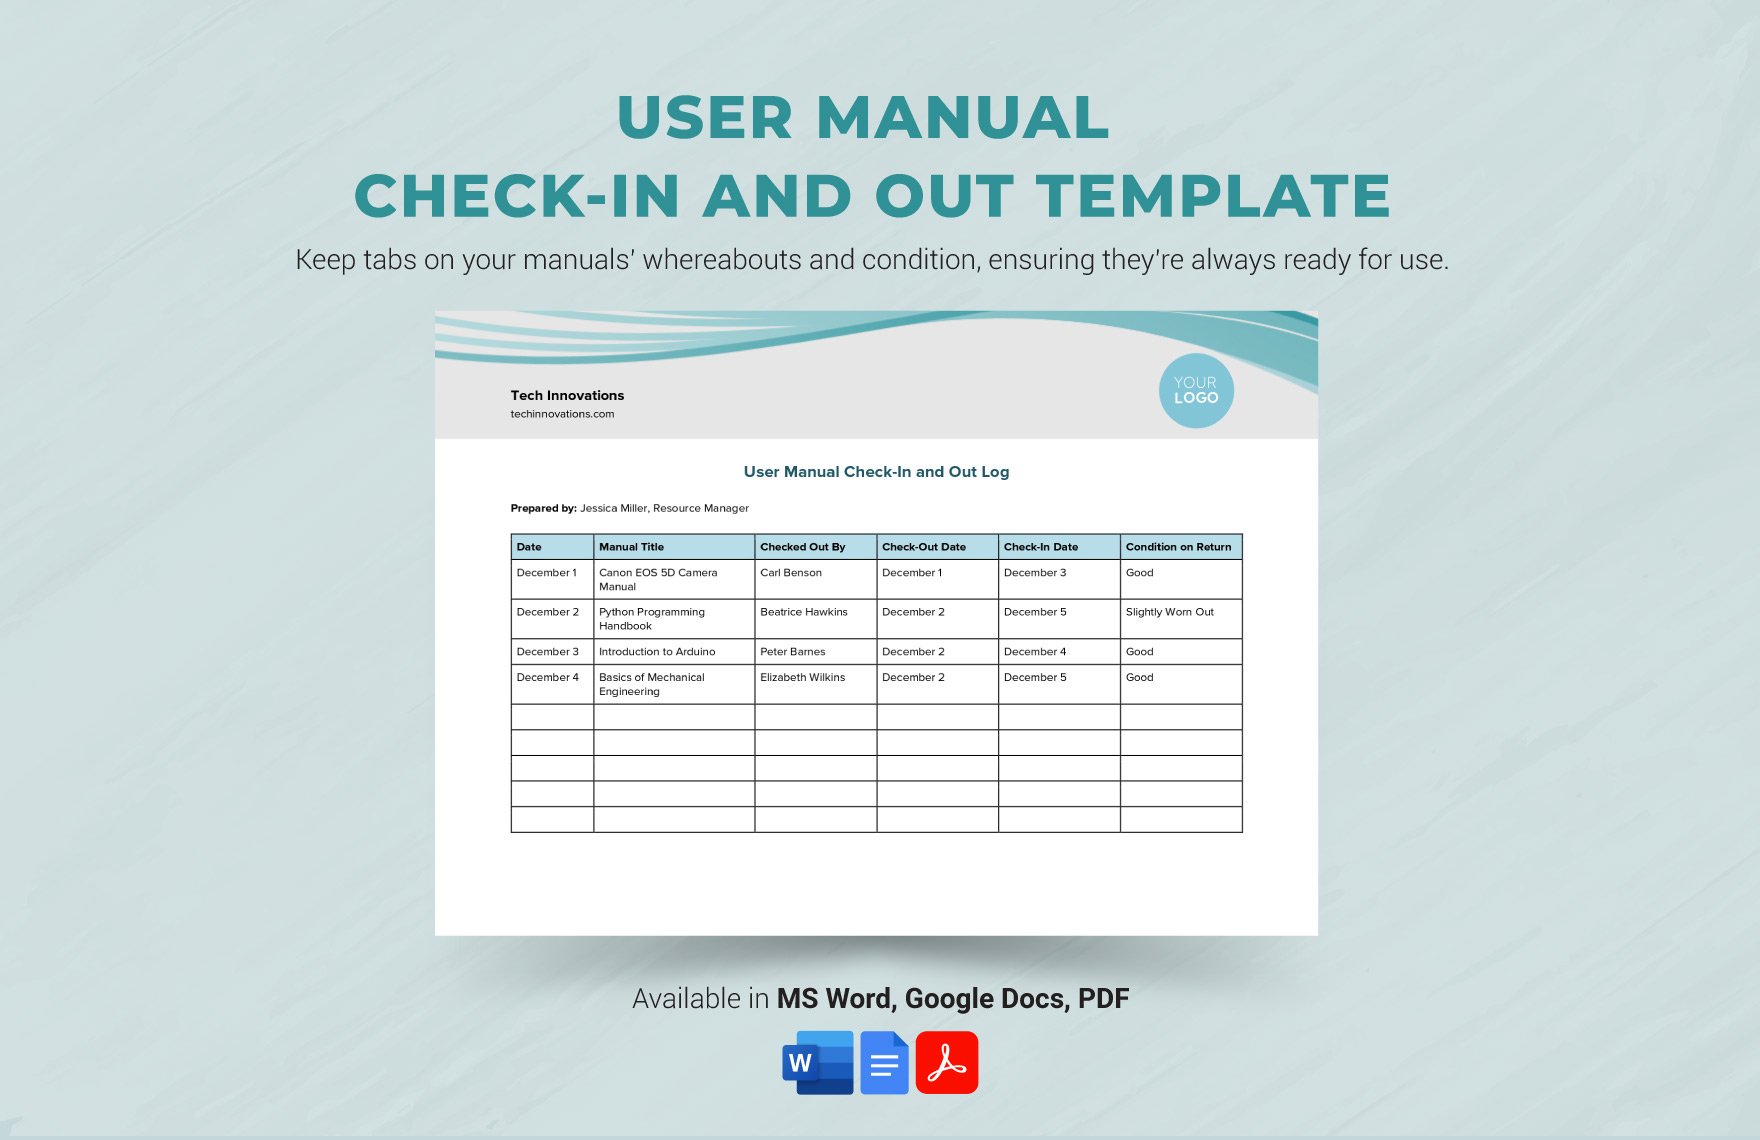 Free User Manual Check-in and Out Template in Word, Google Docs, PDF